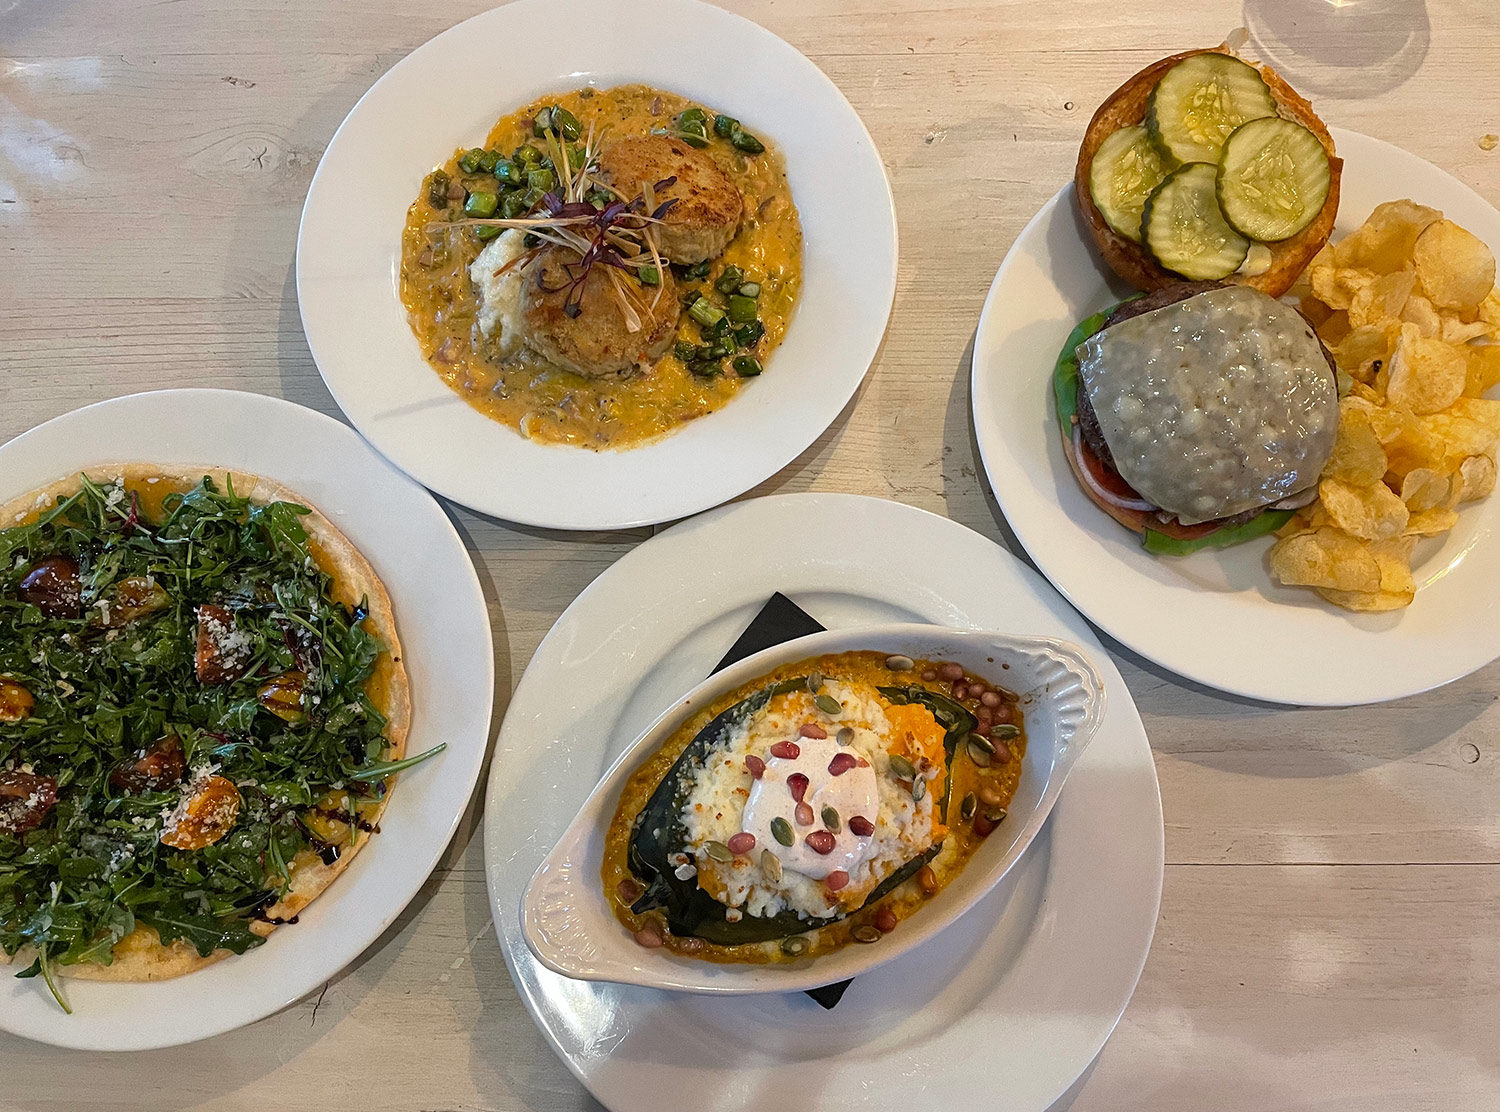 The Wayback The seasonal menu at The Wayback Cafe provides a balanced selection of healthy plates and southern comfort dishes. The sweet potato-stuffed poblano was one of our favorites